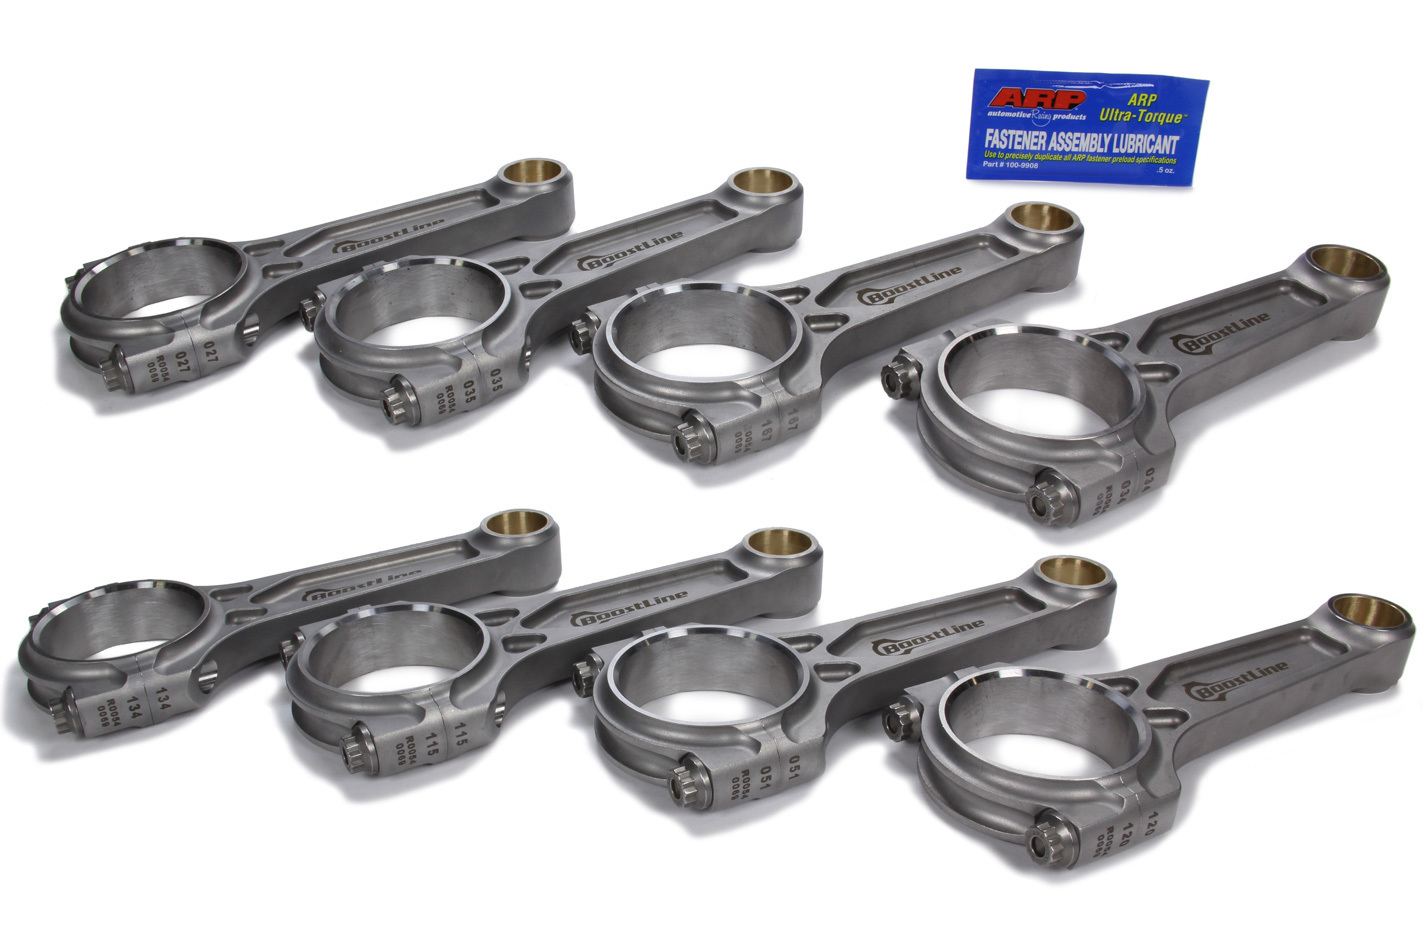 Wiseco Pistons BC6700-990 Connecting Rod, Boostline, I Beam, 6.700 Long, Bushed, 7/16 in Cap Screws, ARP2000, Forged Steel, Big Block Chevy, Set of 8